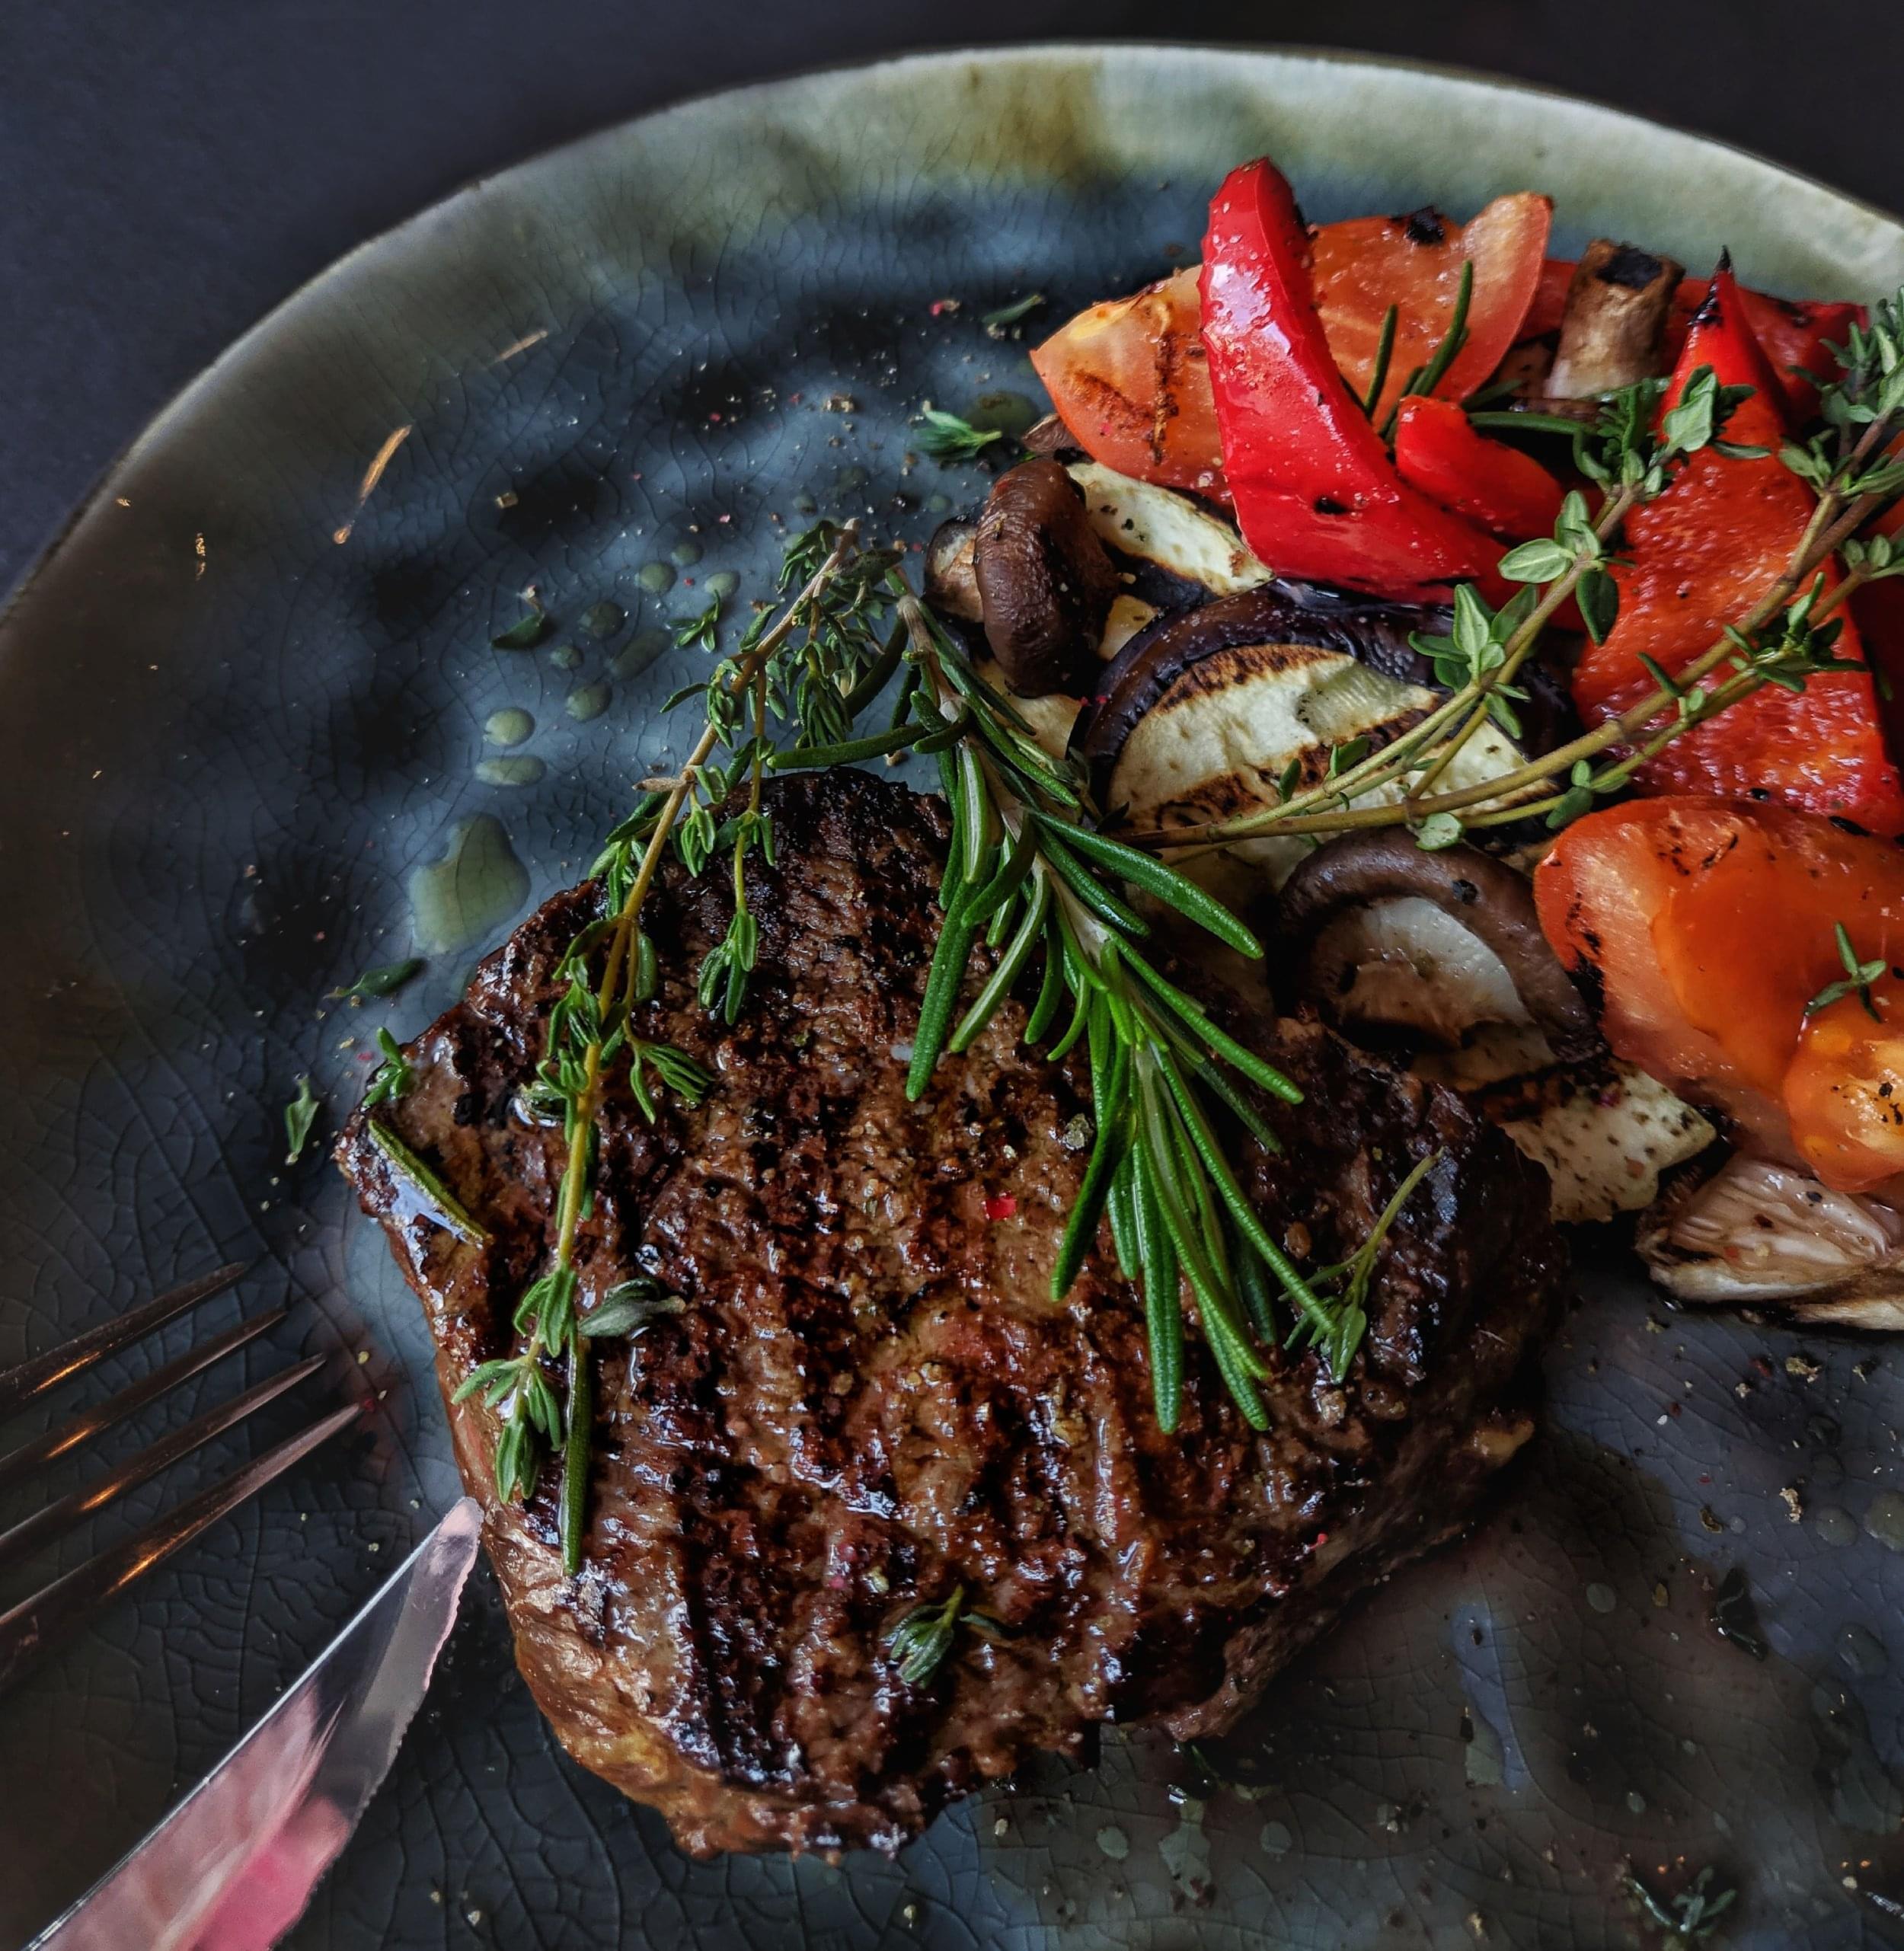 A steak on a plate with sage as garnish, peppers and mushrooms on the side